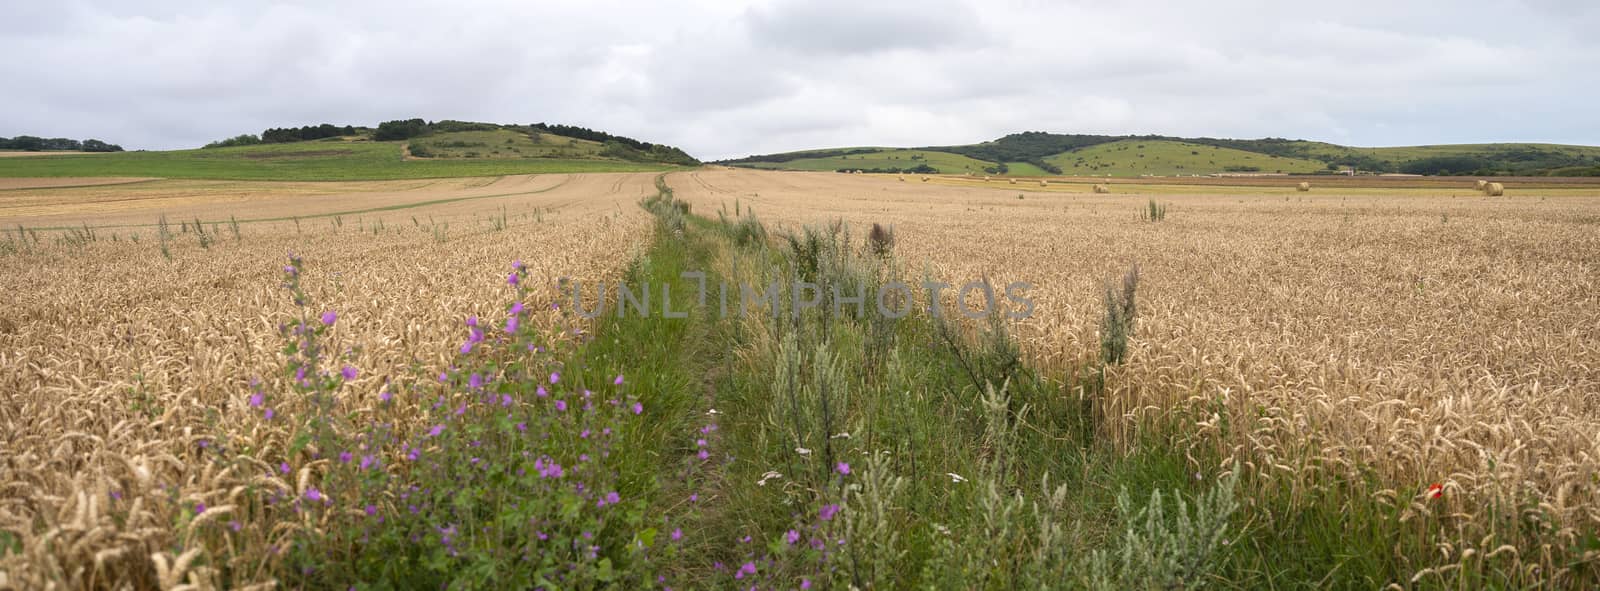 landscape with summer flowers and straw bales in french normany by ahavelaar